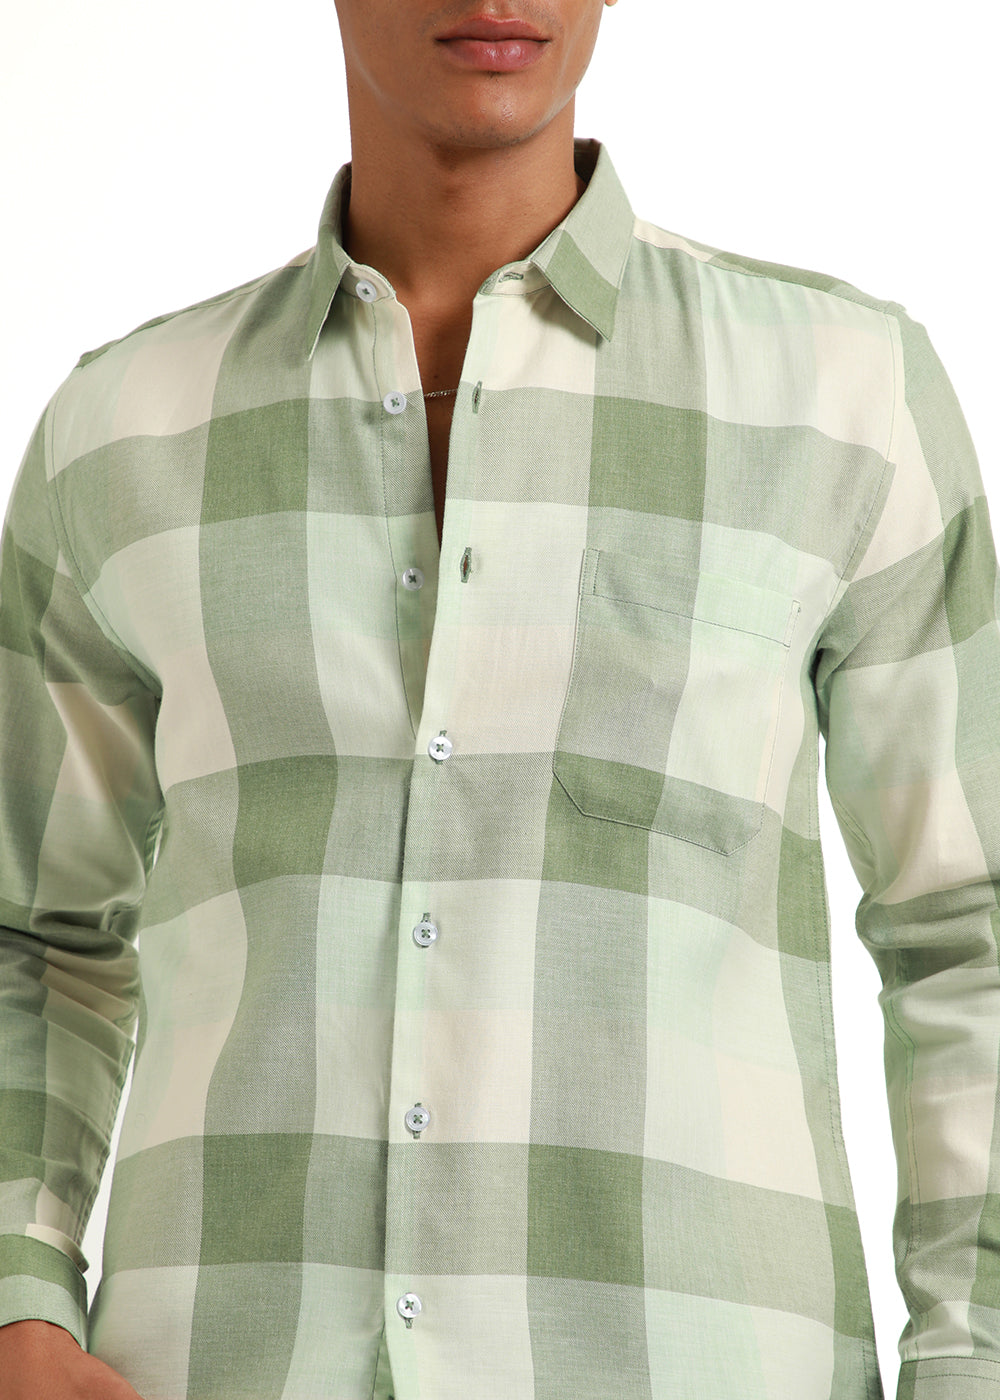 apple green check shirt front view